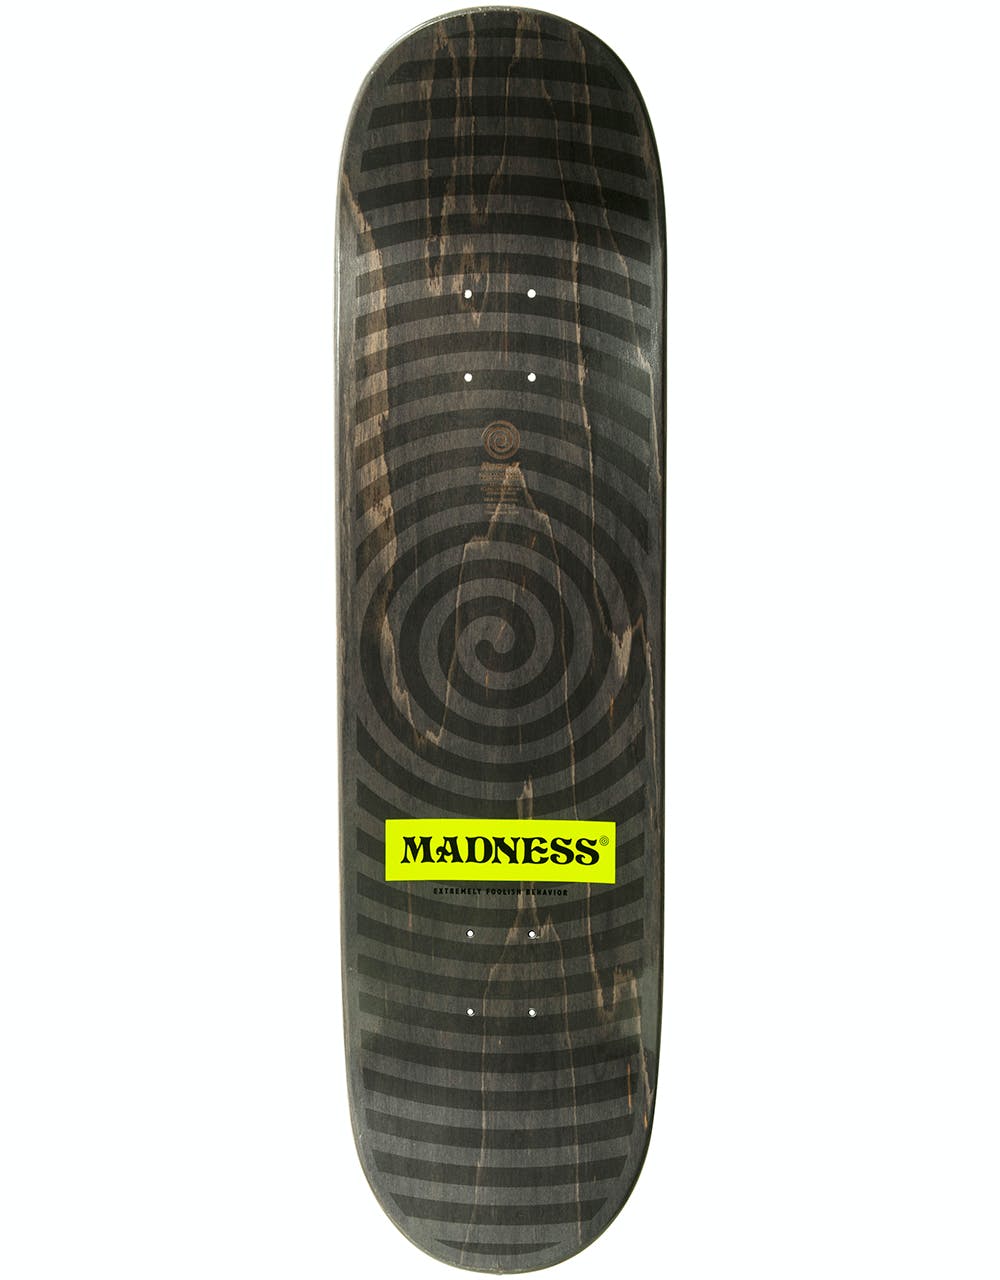 Madness Eating Son R7 Skateboard Deck - 8.5"